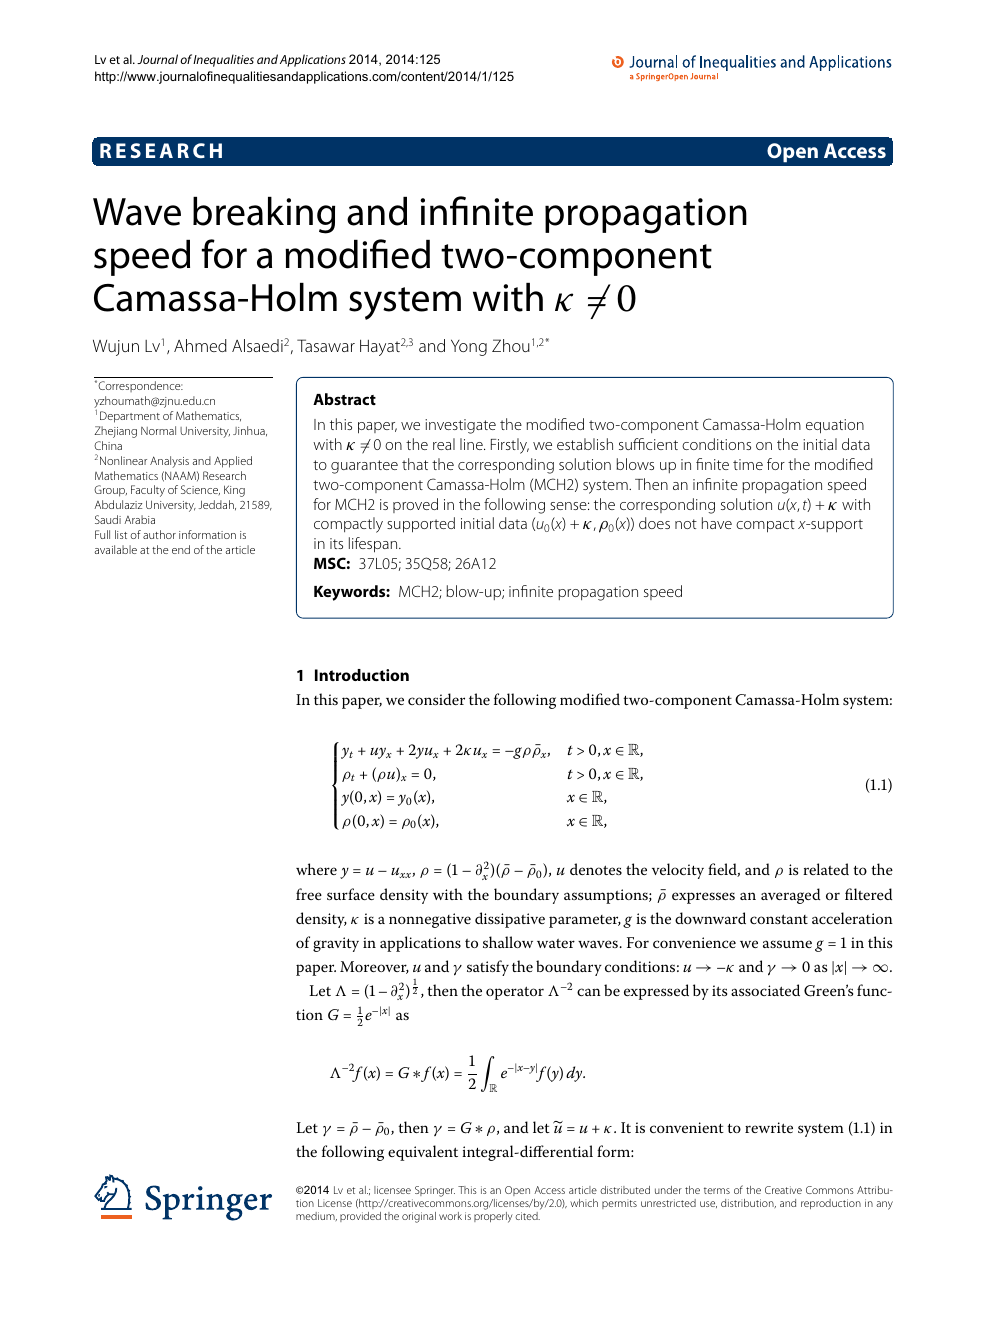 Wave Breaking And Infinite Propagation Speed For A Modified Two Component Camassa Holm System With K 0 Topic Of Research Paper In Mathematics Download Scholarly Article Pdf And Read For Free On Cyberleninka Open